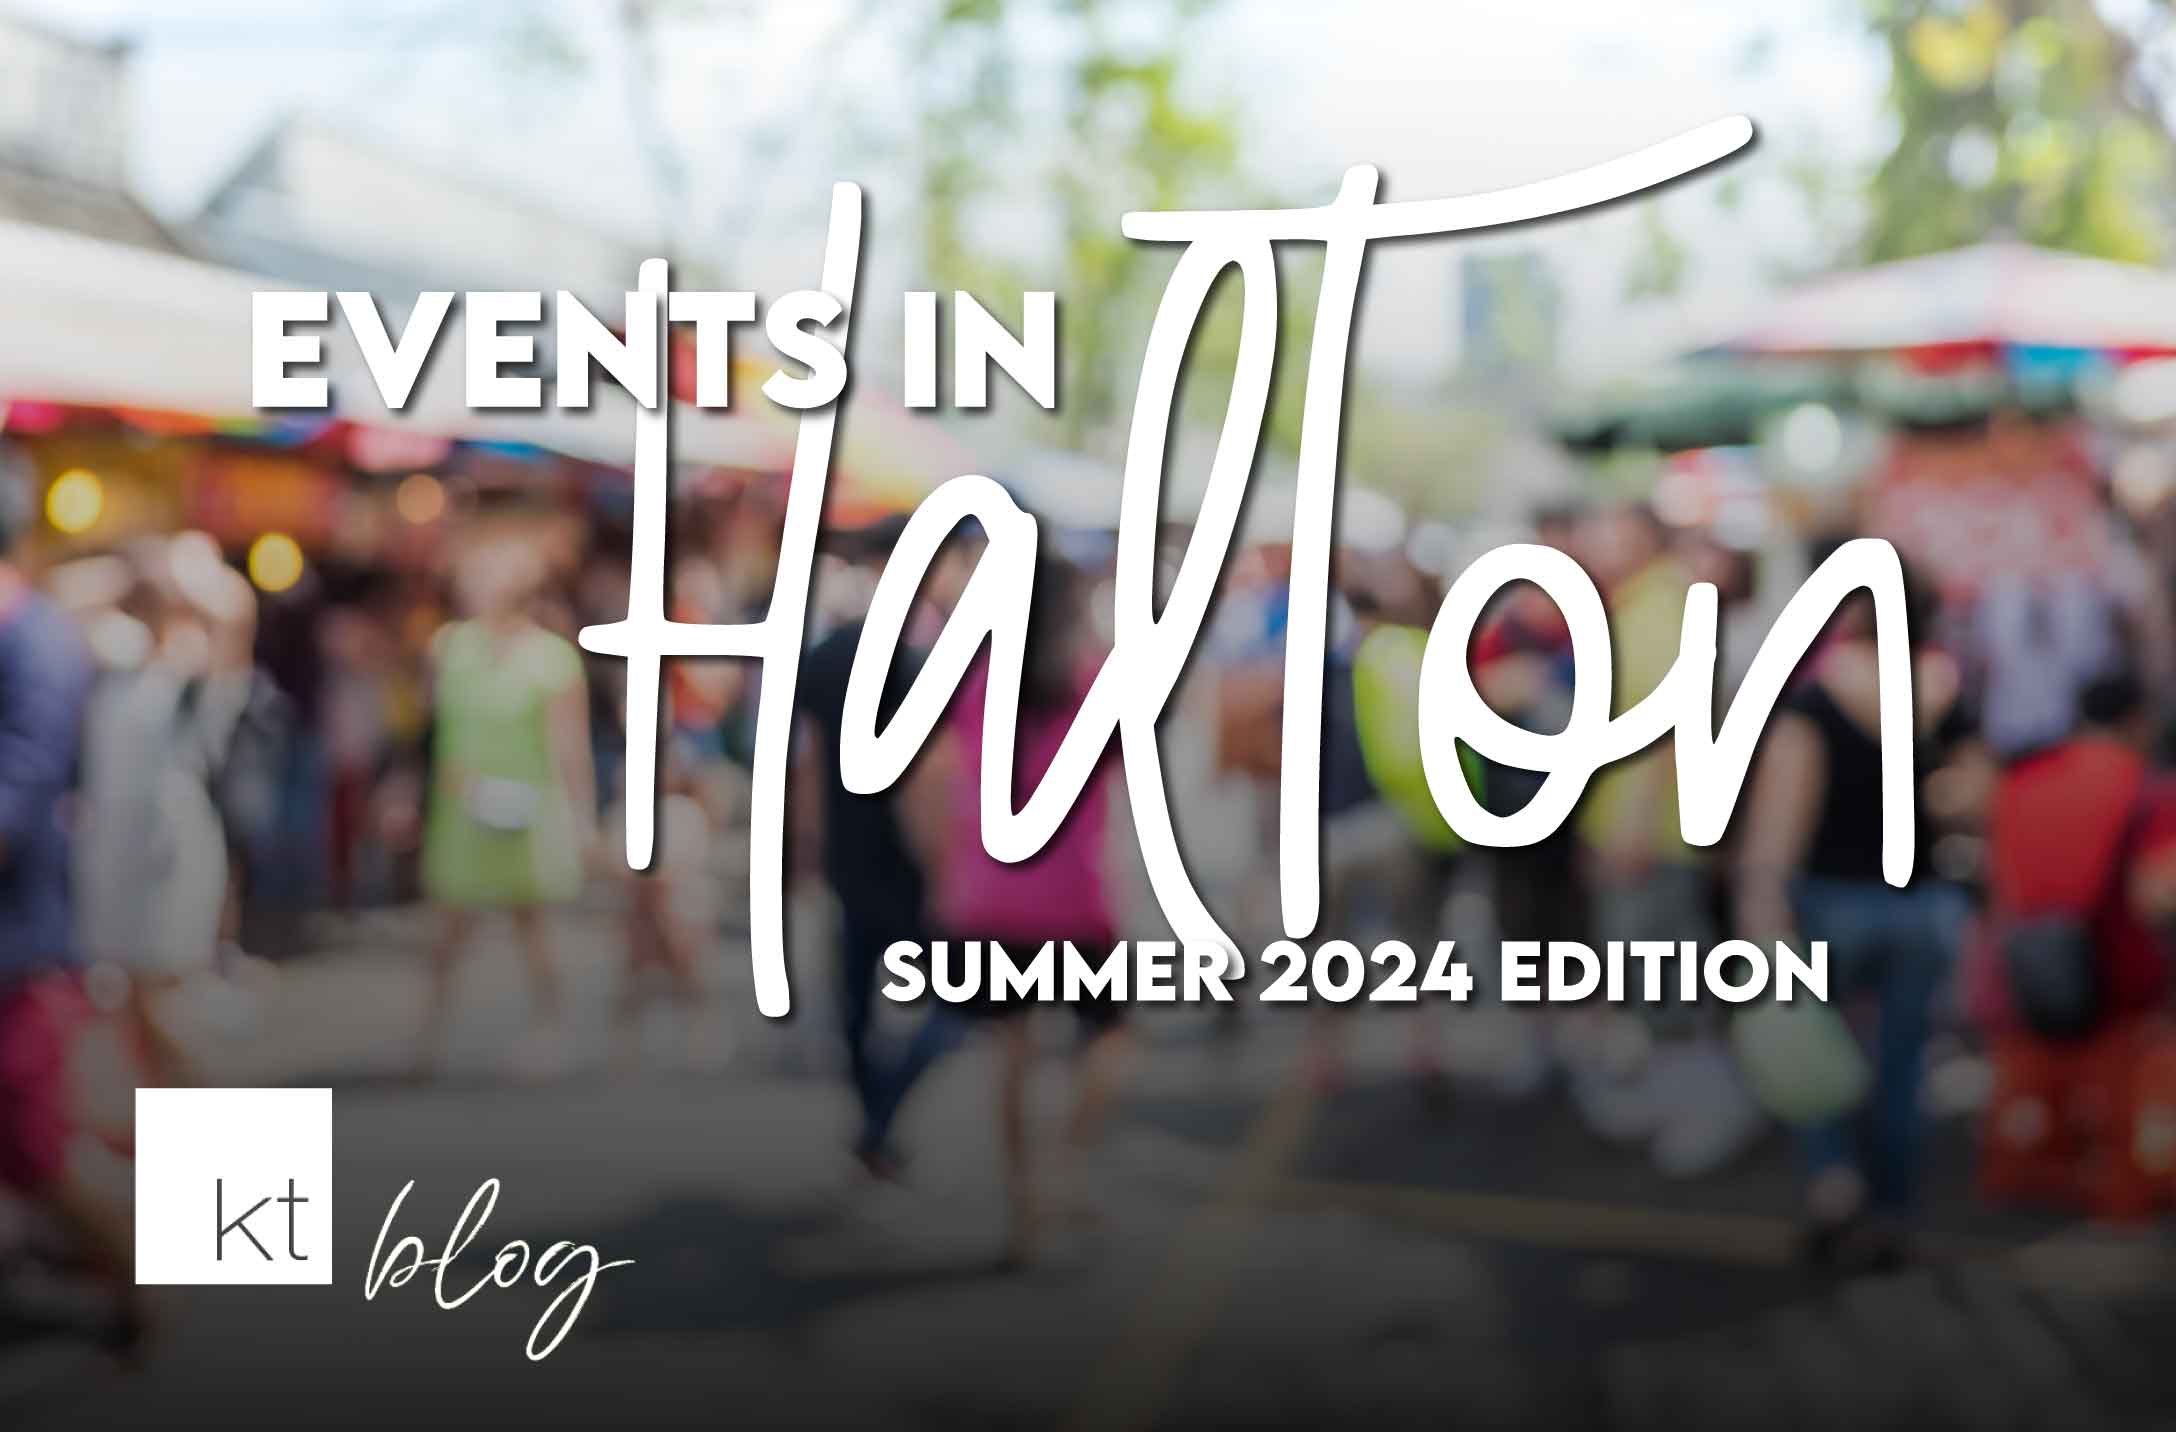 Blurred summer scene with halton events summer 2024 edition text in the foreground.